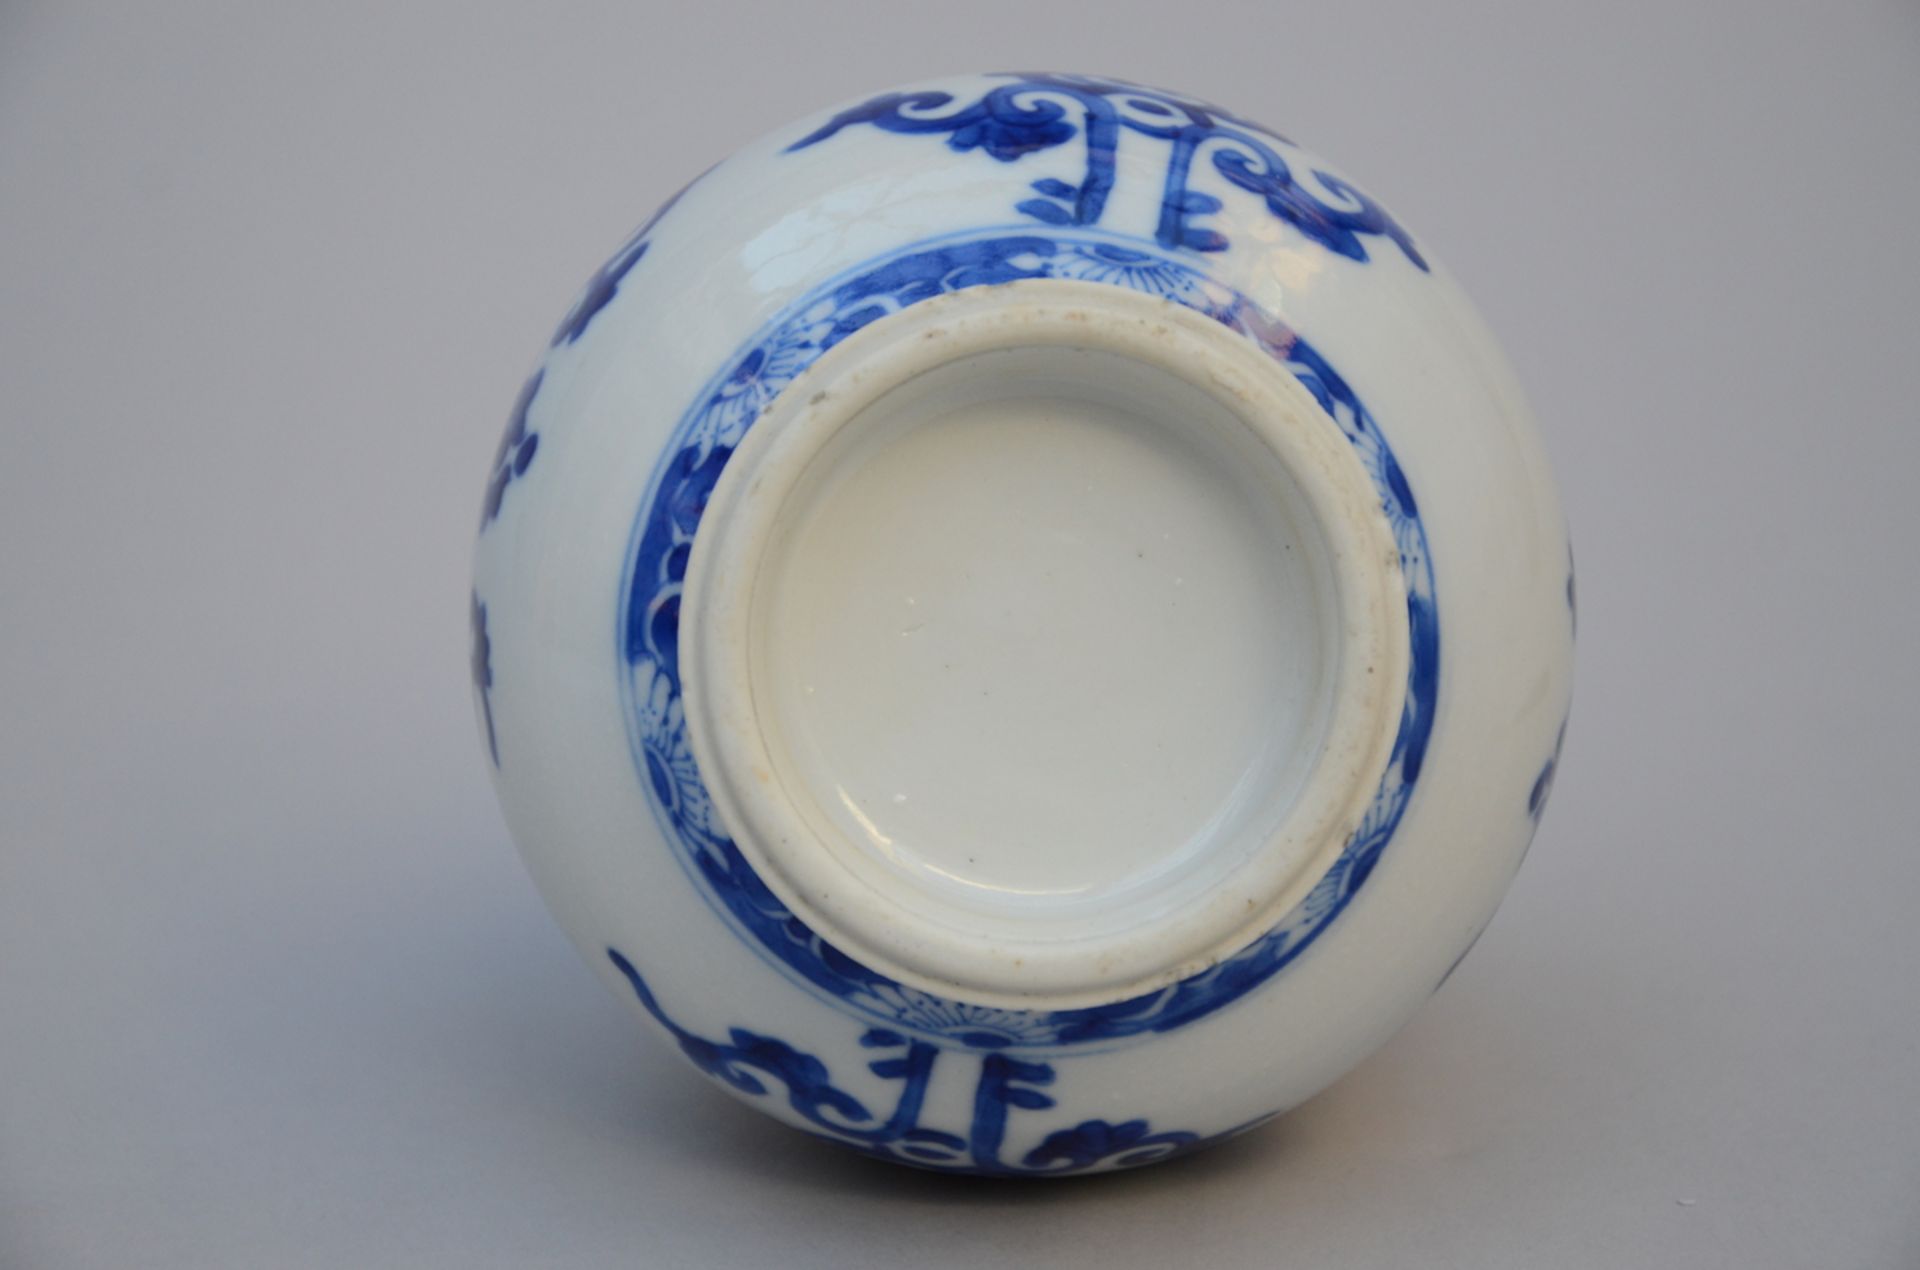 Garlic head vase in Chinese blue and white porcelain, Kangxi period (19 cm) - Image 3 of 3